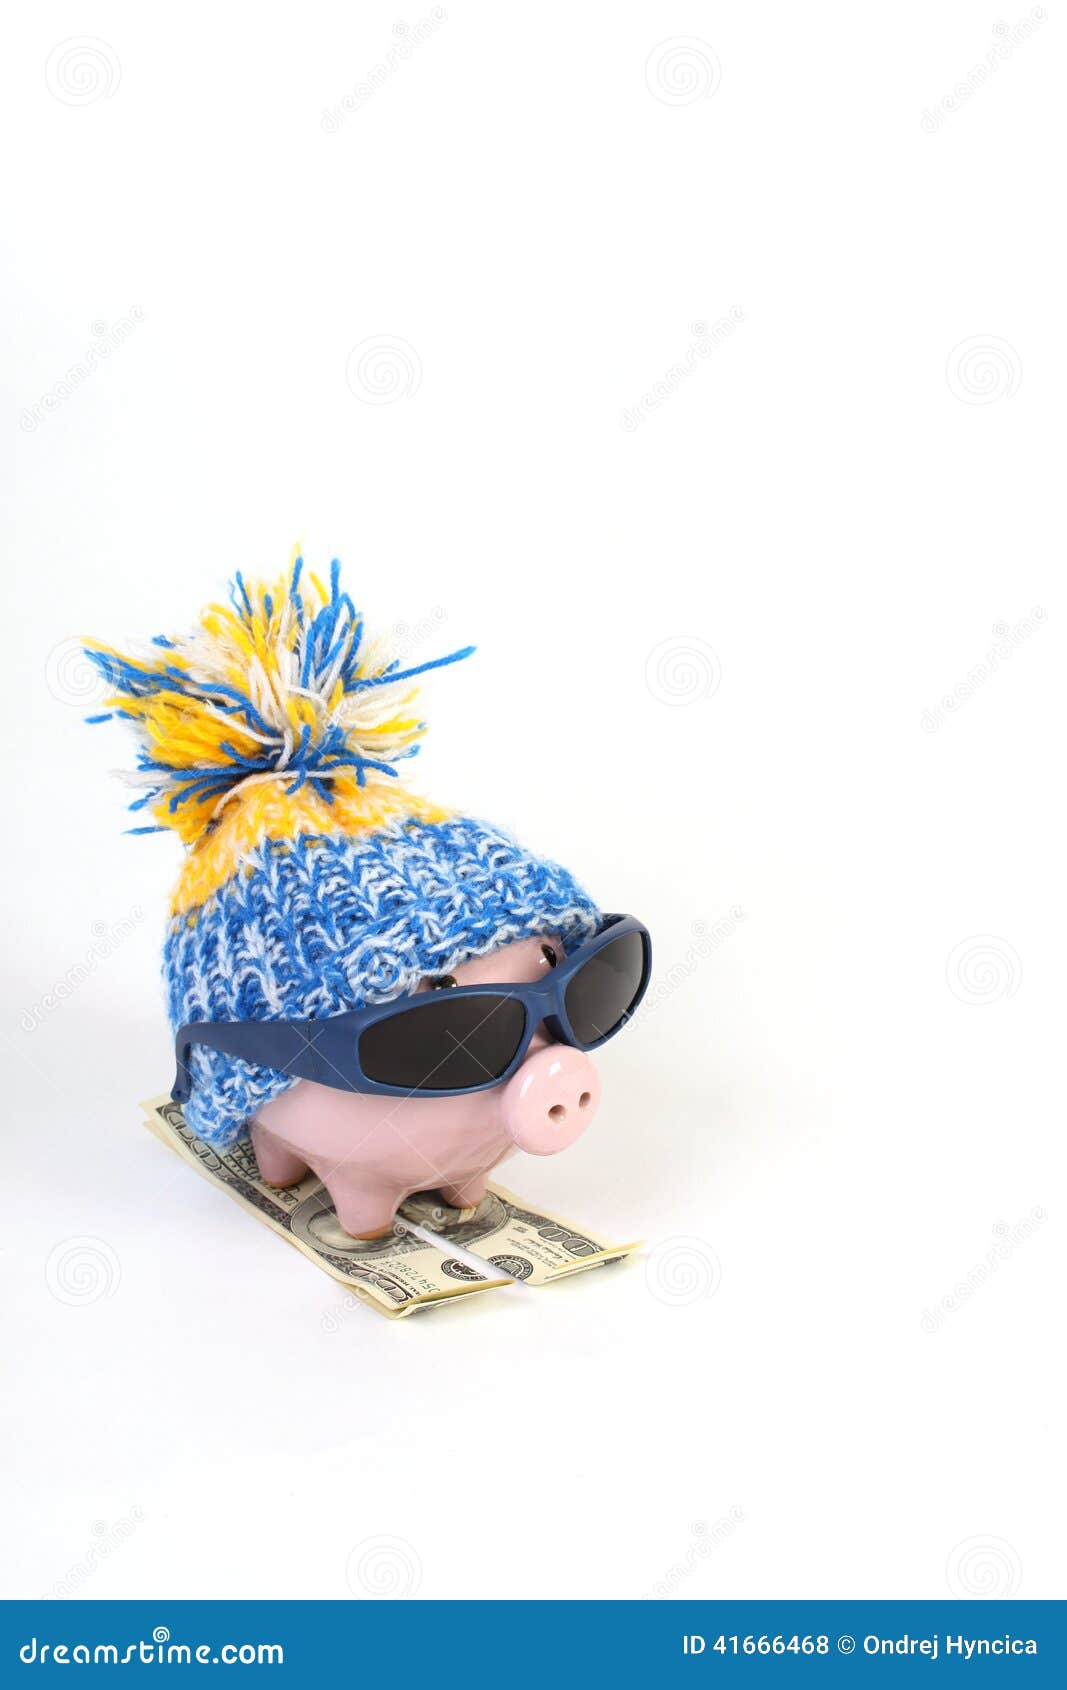 winter piggy bank with hat with pom-pom standing on skies of greenback hunderd dollars with sunglasses